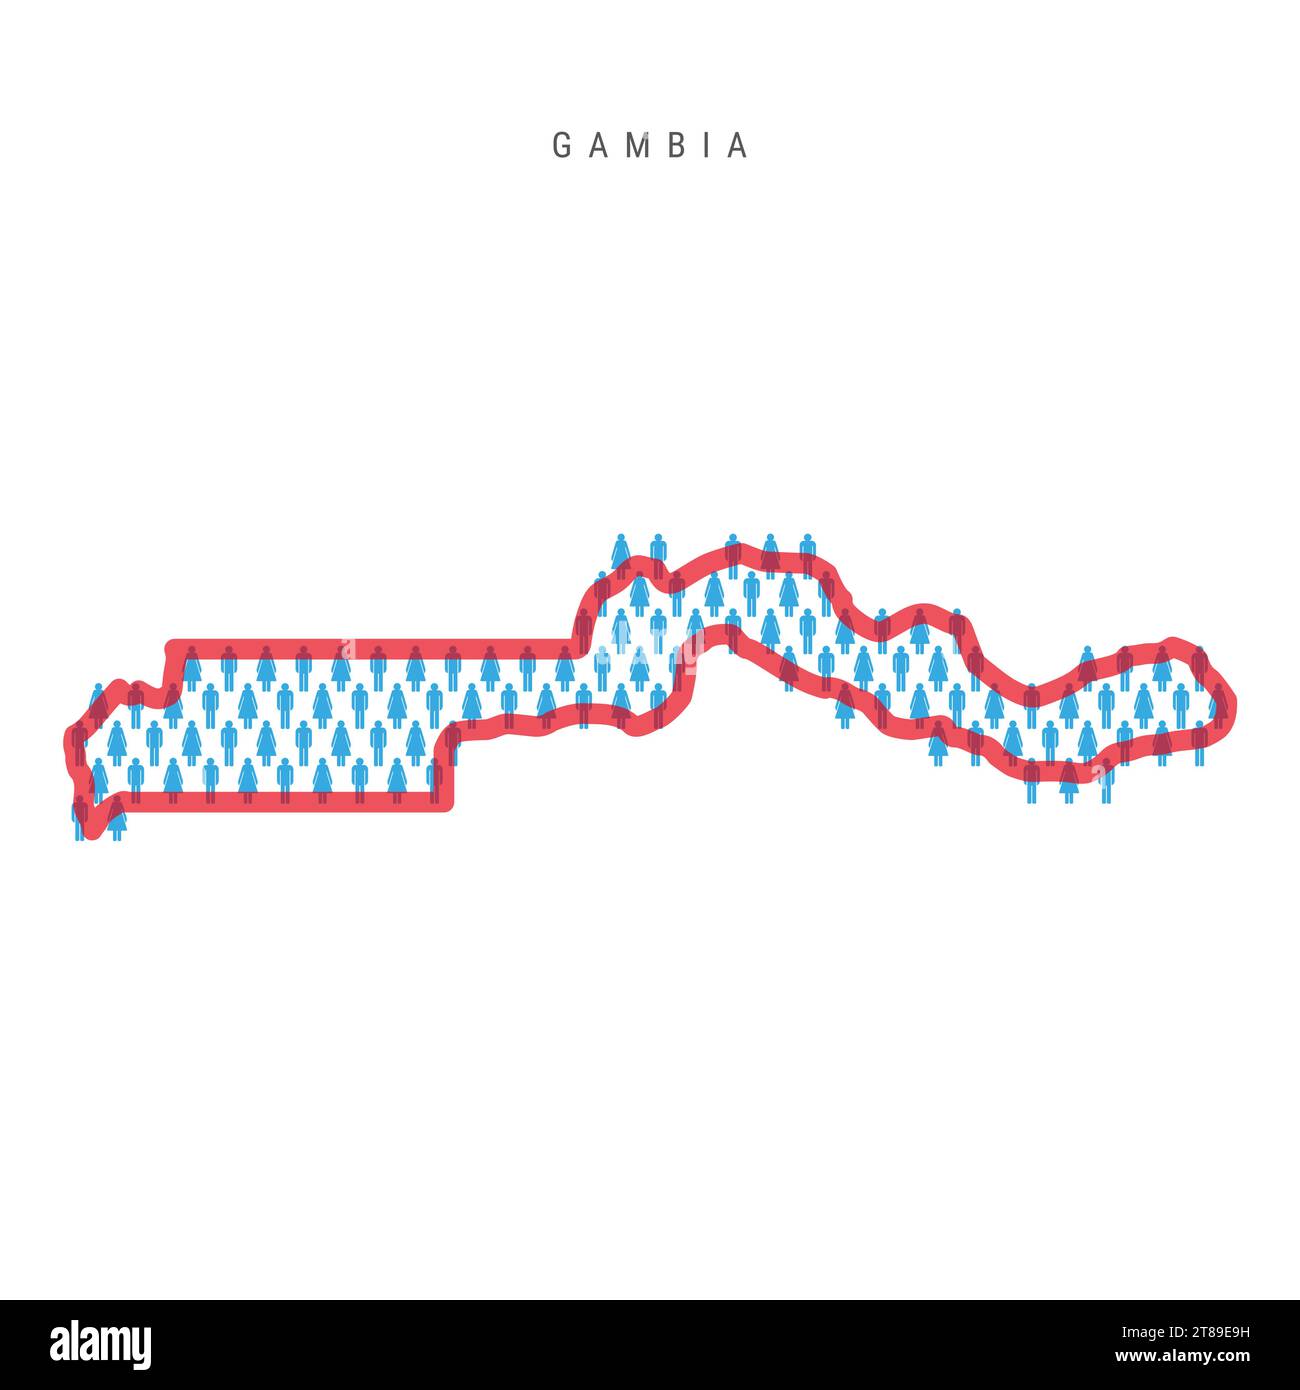 Gambia population map. Stick figures Gambian people map with bold red translucent country border. Pattern of men and women icons. Isolated vector illu Stock Vector